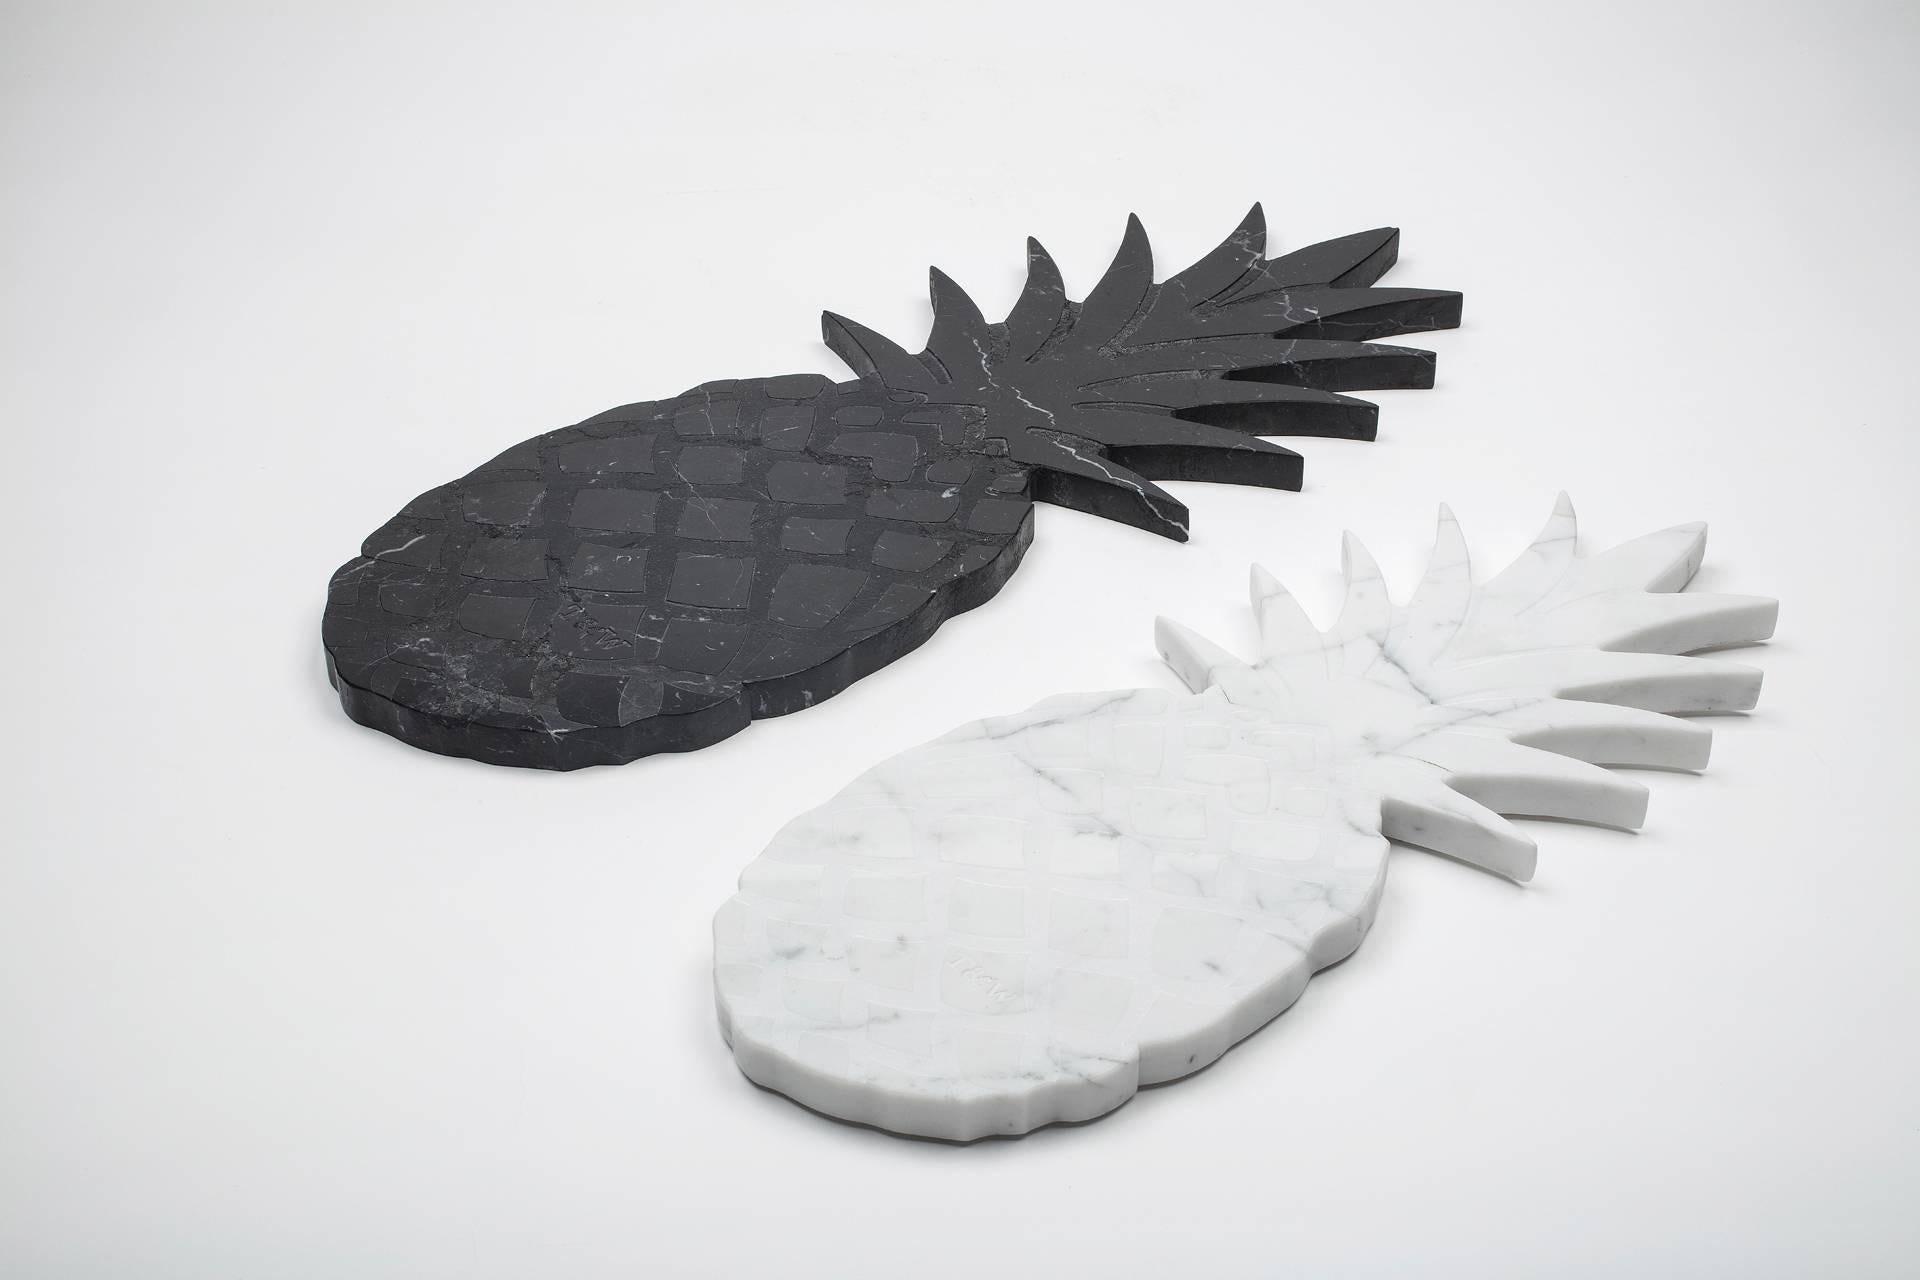 Big black Marquina marble cutting board and serving tray with pineapple shape. Each piece is in a way unique (every marble block is different in veins and shades) and handmade by Italian artisans specialized over generations in processing marble.